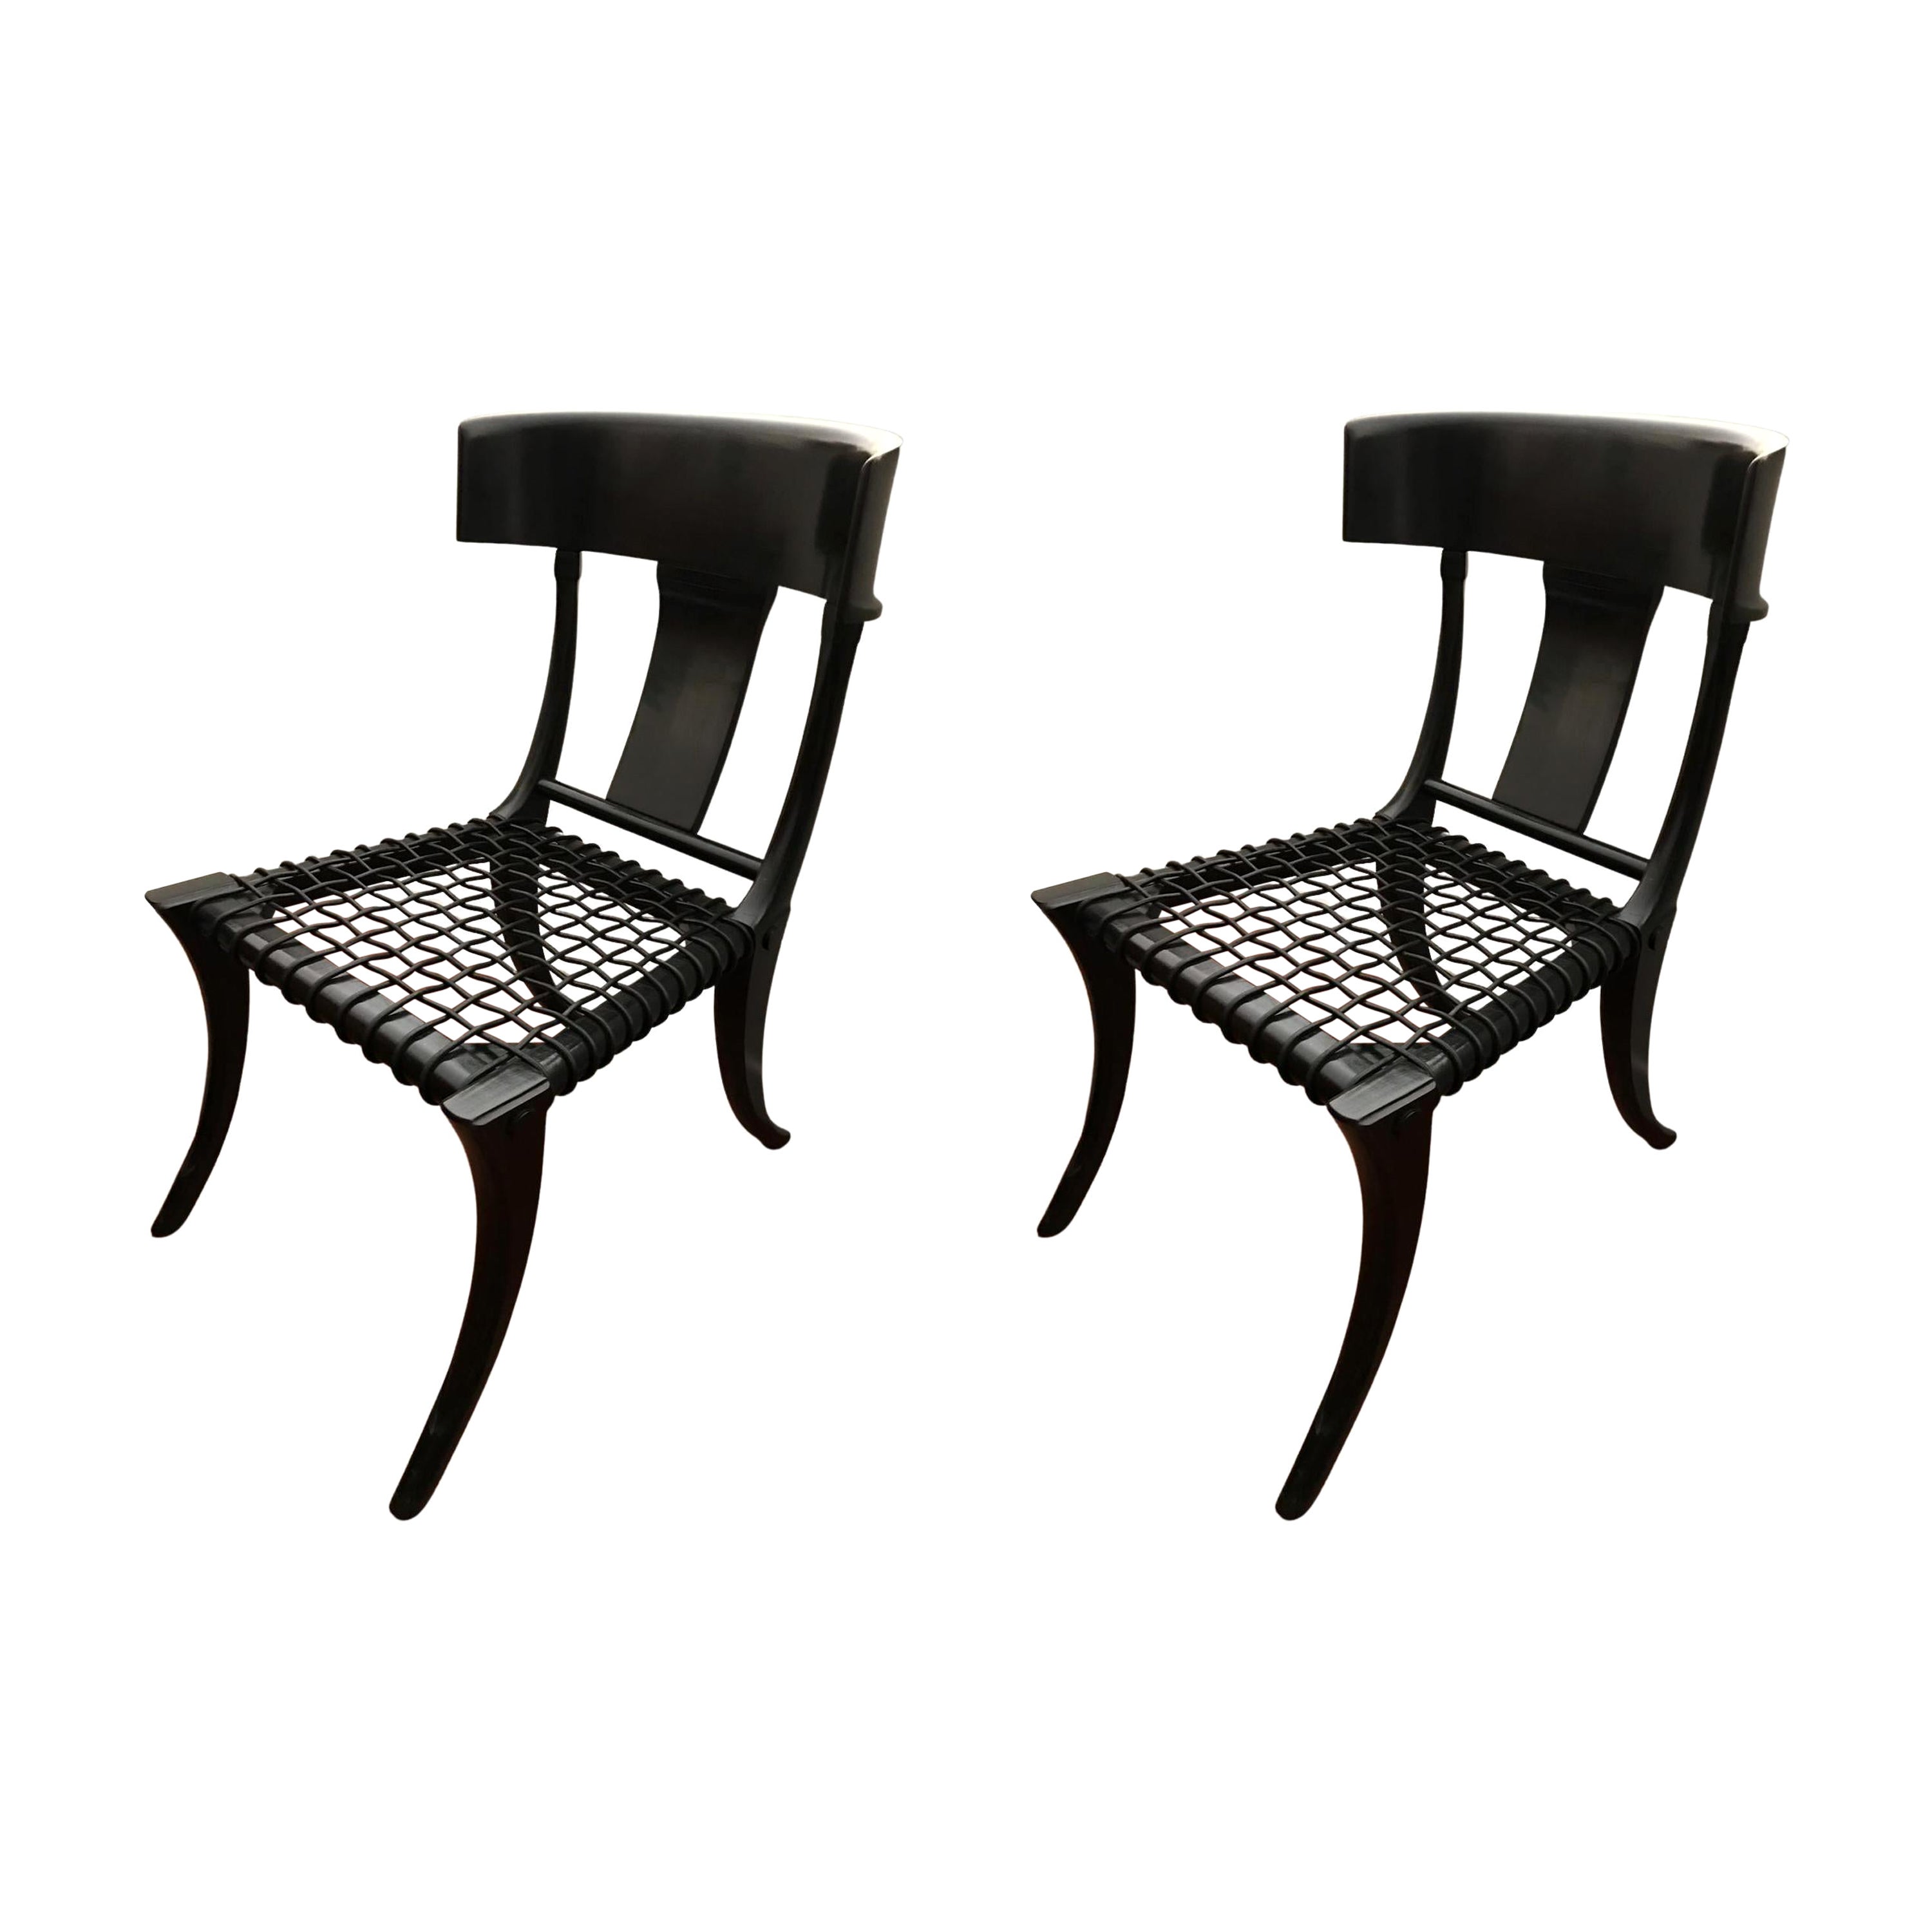 Black Woven Leather Seat Walnut Saber Legs Klismos Chairs Customizable Set of 2 For Sale